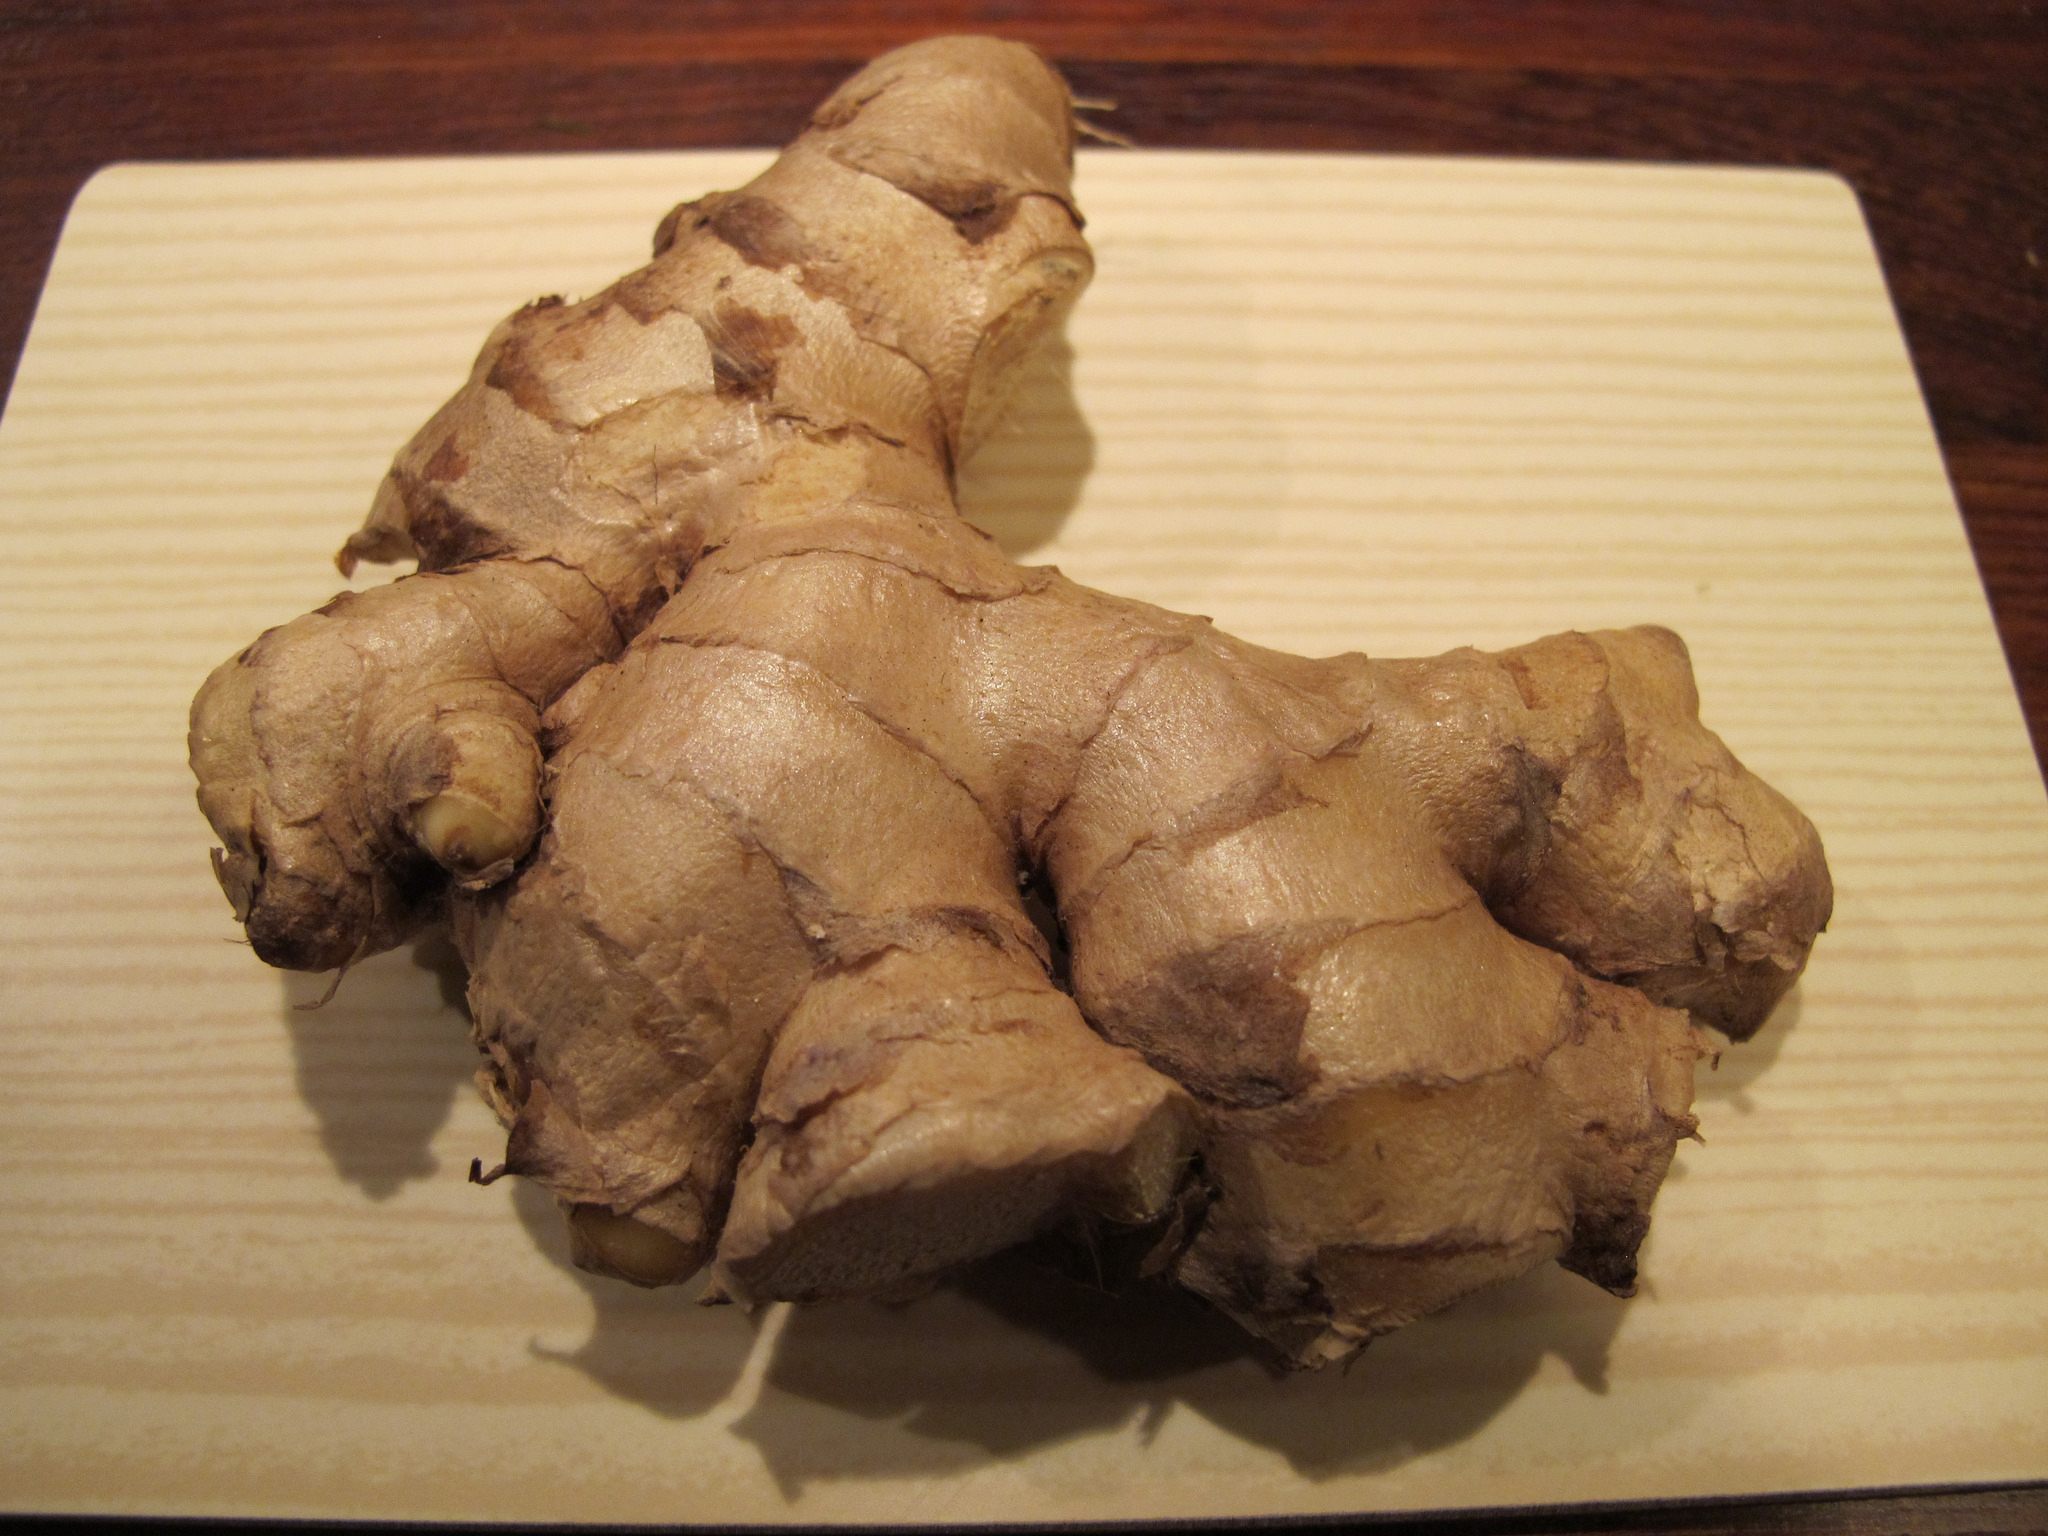 5 Surprising Health Benefits of Ginger (Plus an Easy Ginger and Honey Tea Recipe!)